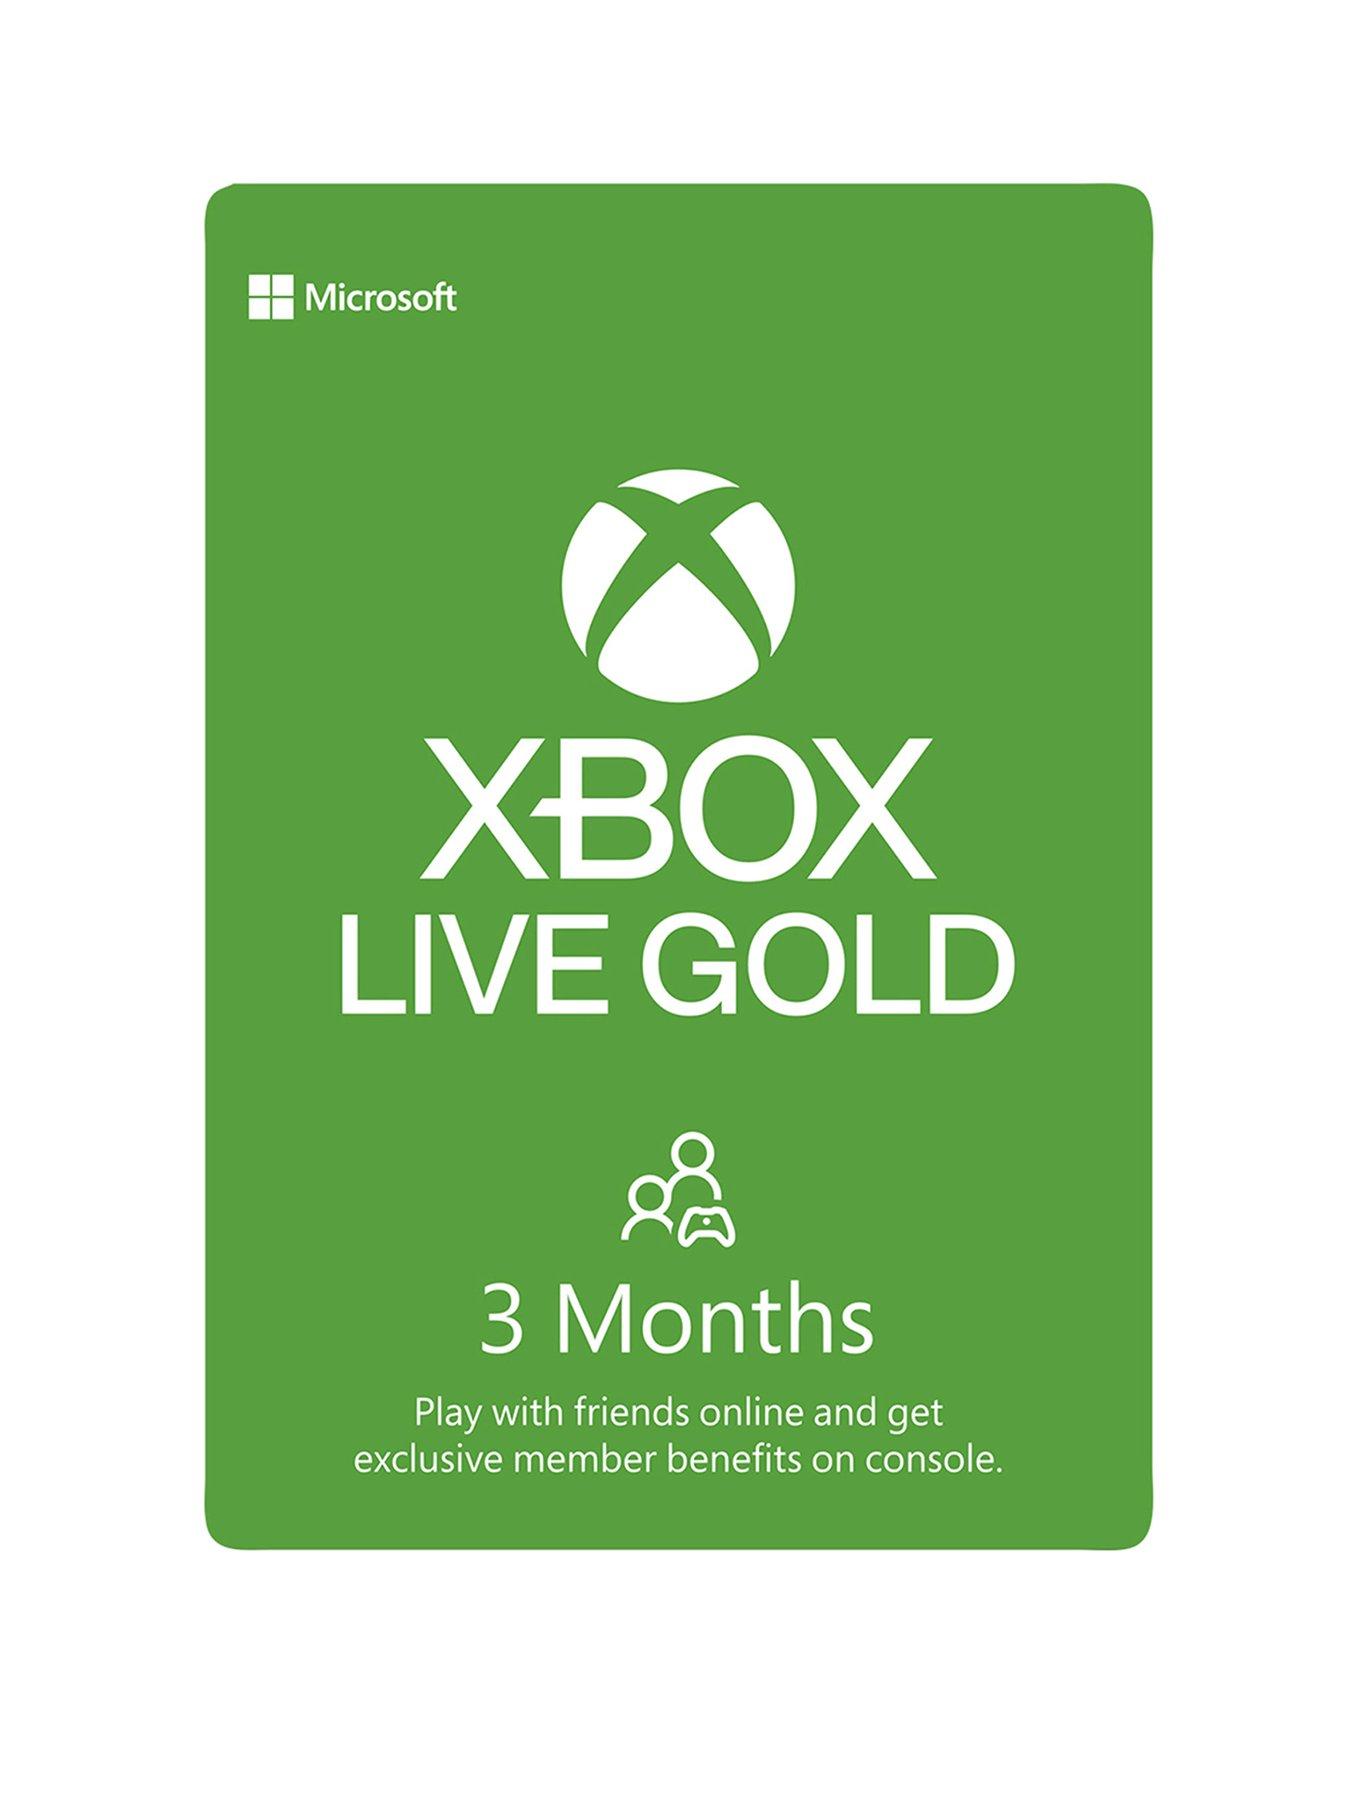 Xbox One Xbox LIVE Gold 3 Month Membership - Digital Download | very.co.uk